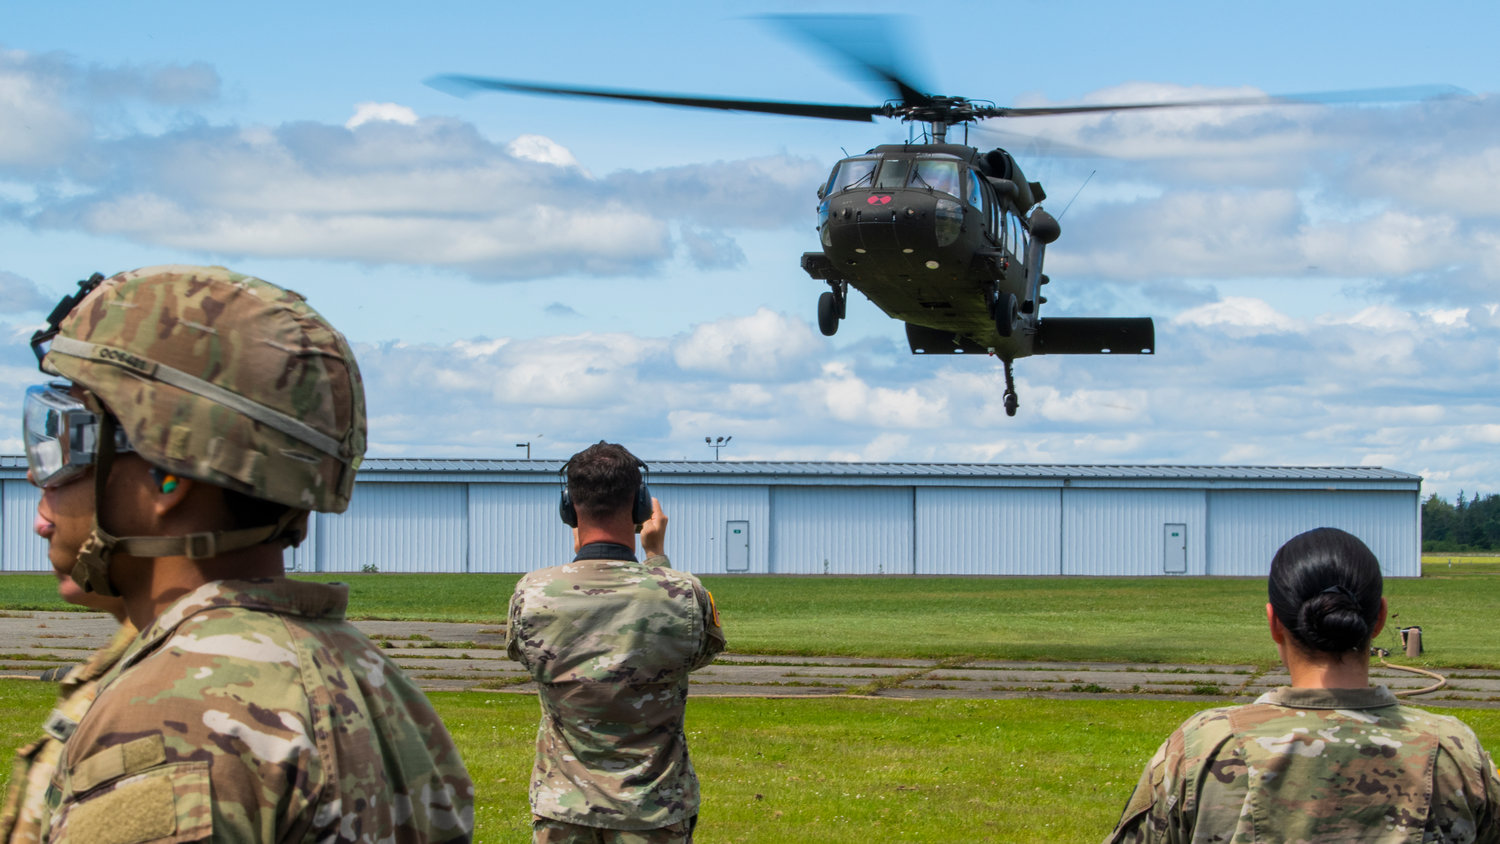 A Black Hawk helicopter from Joint Base Lewis-McChord hovers above the Chehalis-Centralia Airport on Wednesday afternoon. The airport hosted training exercises focused on refueling helicopters.